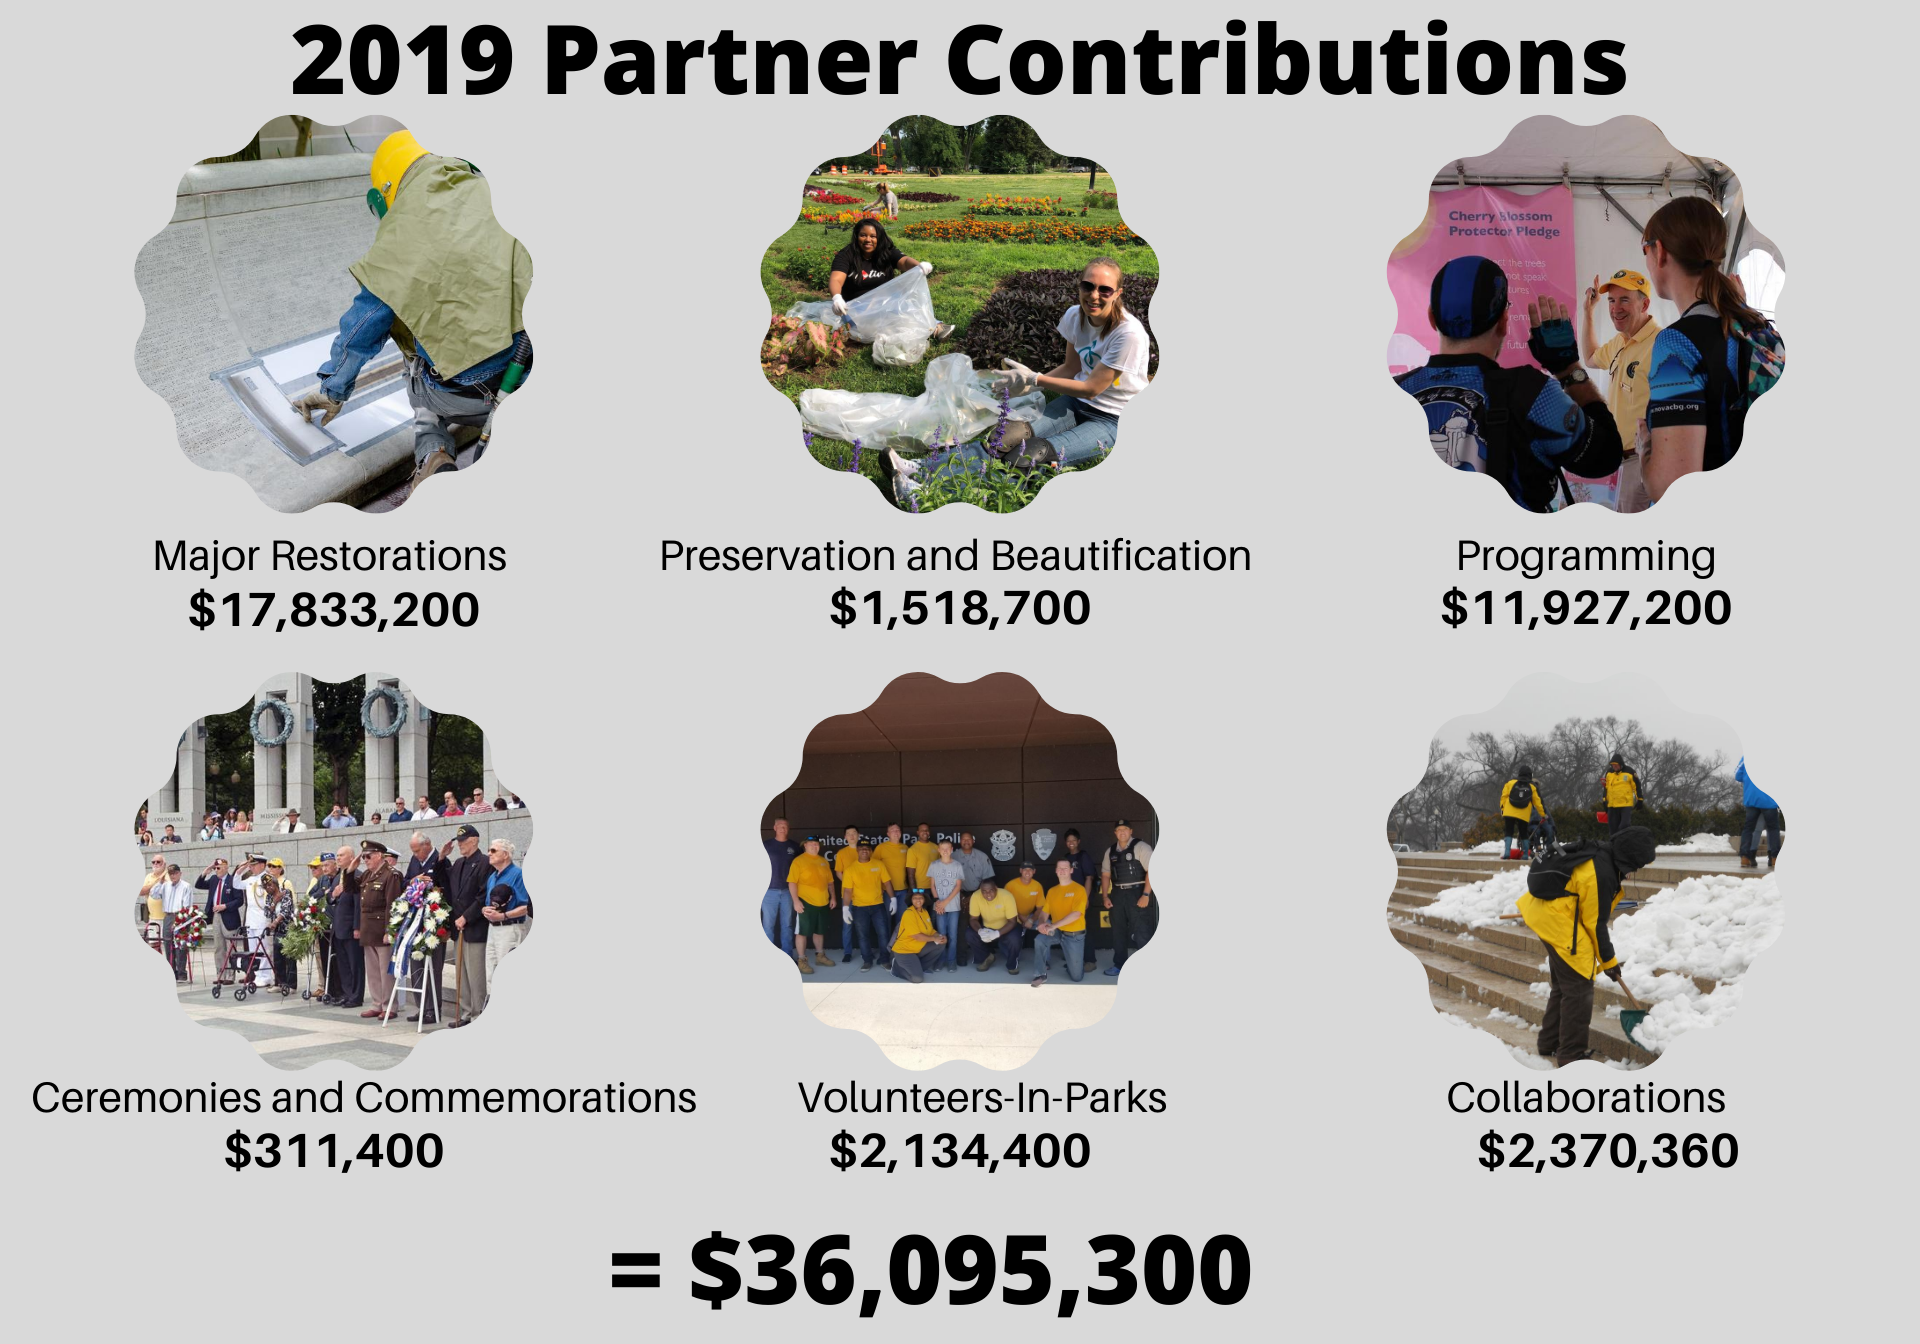 Graphic showing breakdown of $36 million in partner contributions to the National Mall